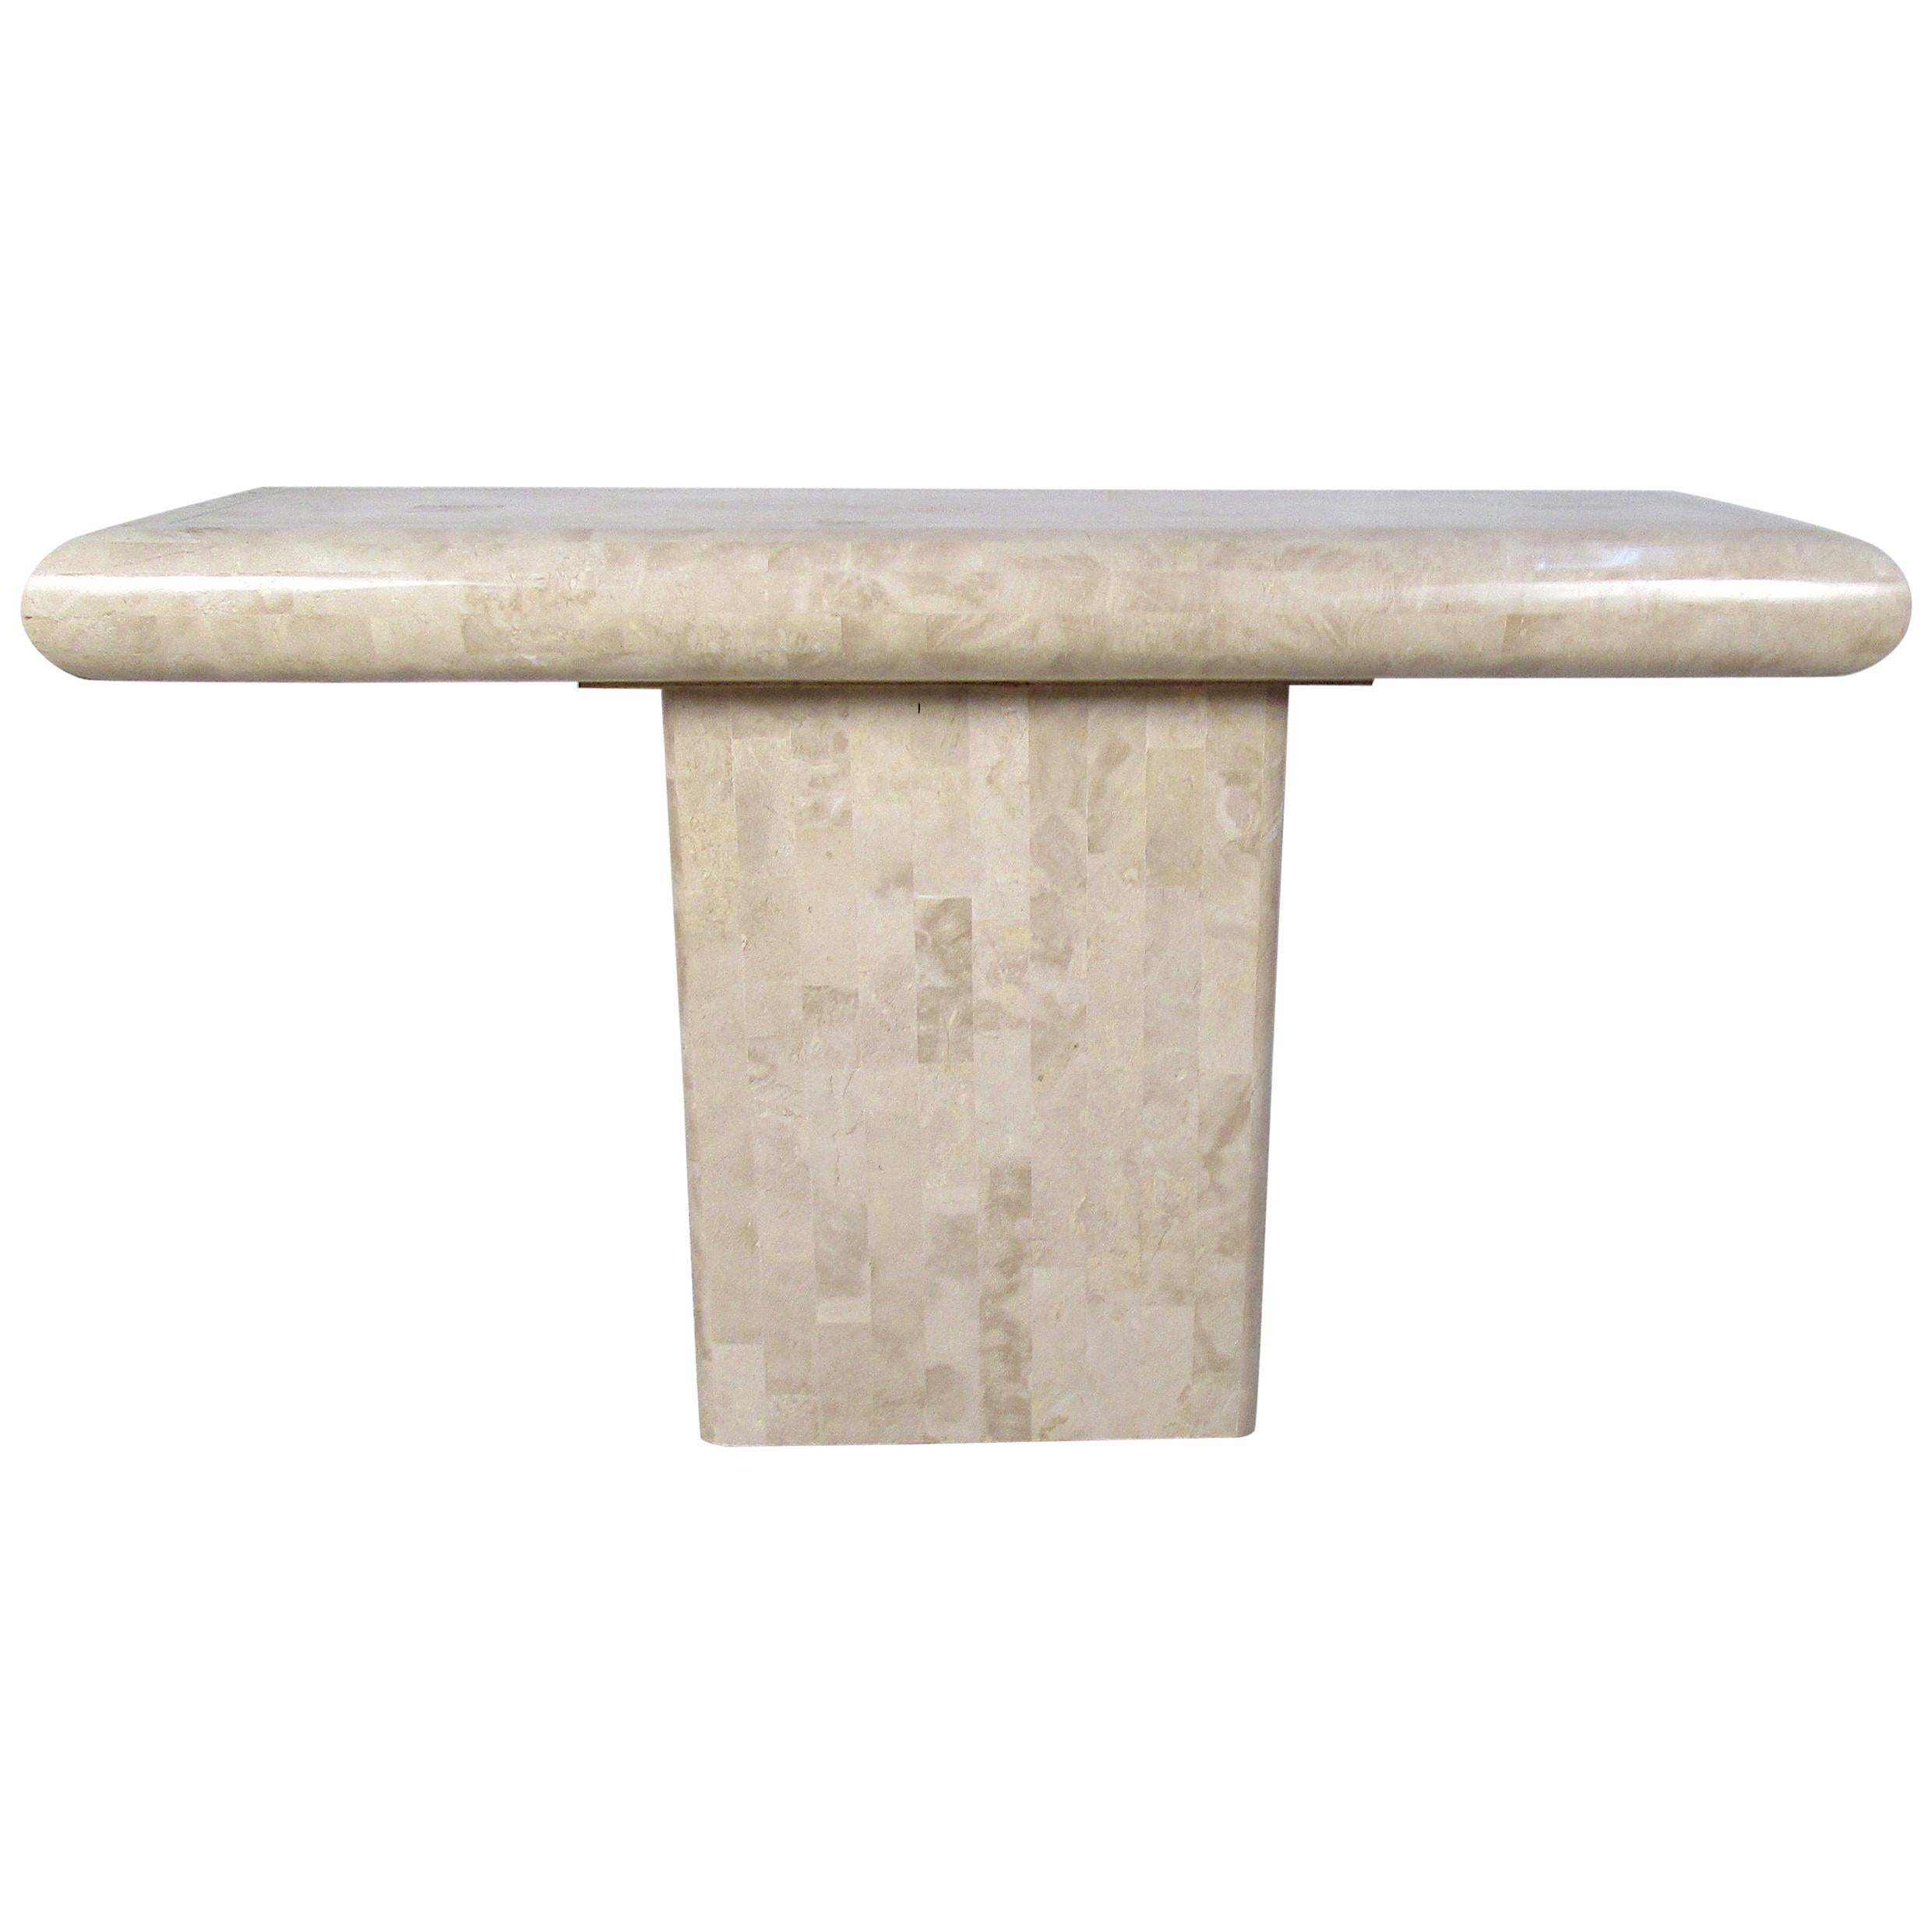 This stunning hall table by Maitland smith boasts a tessellated stone top and a pedestal base. A stylish design that looks great behind the sofa, in the hallway, or even in the entryway. Wonderful beveled edges along the top add to the midcentury